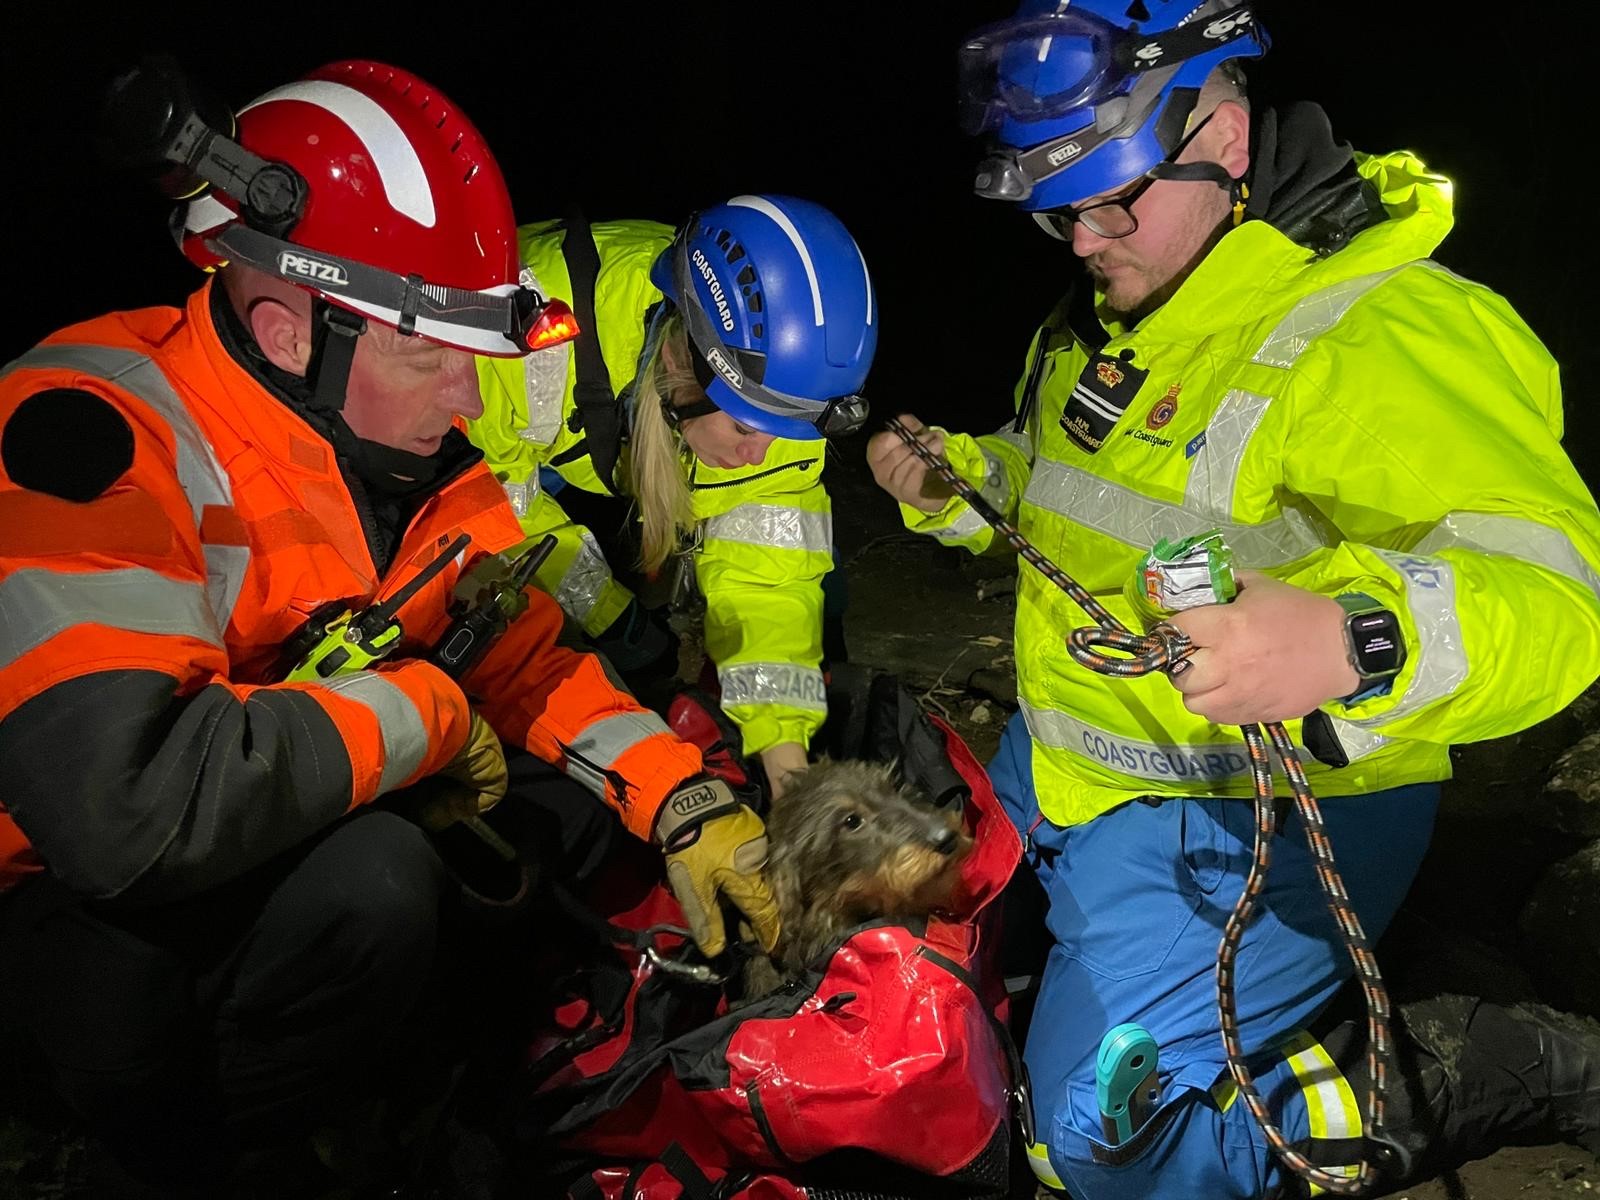 Crews rescued Bear the dog from a cliff face in Capel-le-Ferne, Folkestone.